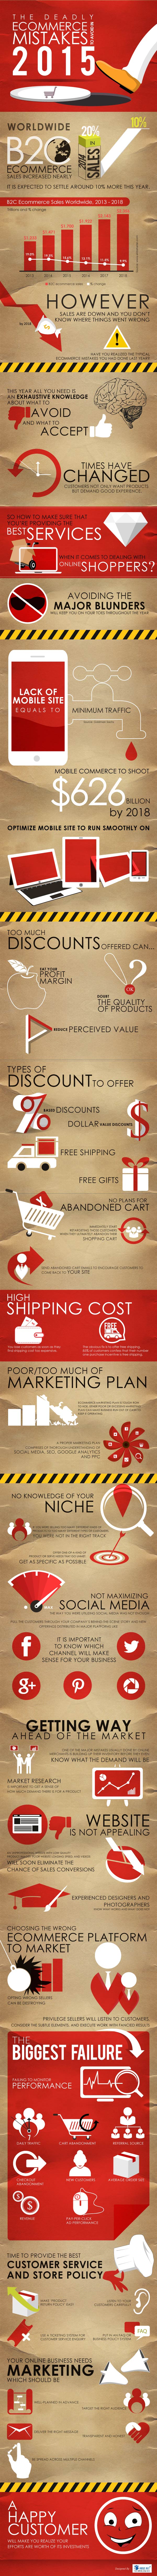 The-deadly-eCommerce-mistakes-to-avoid-in-2015